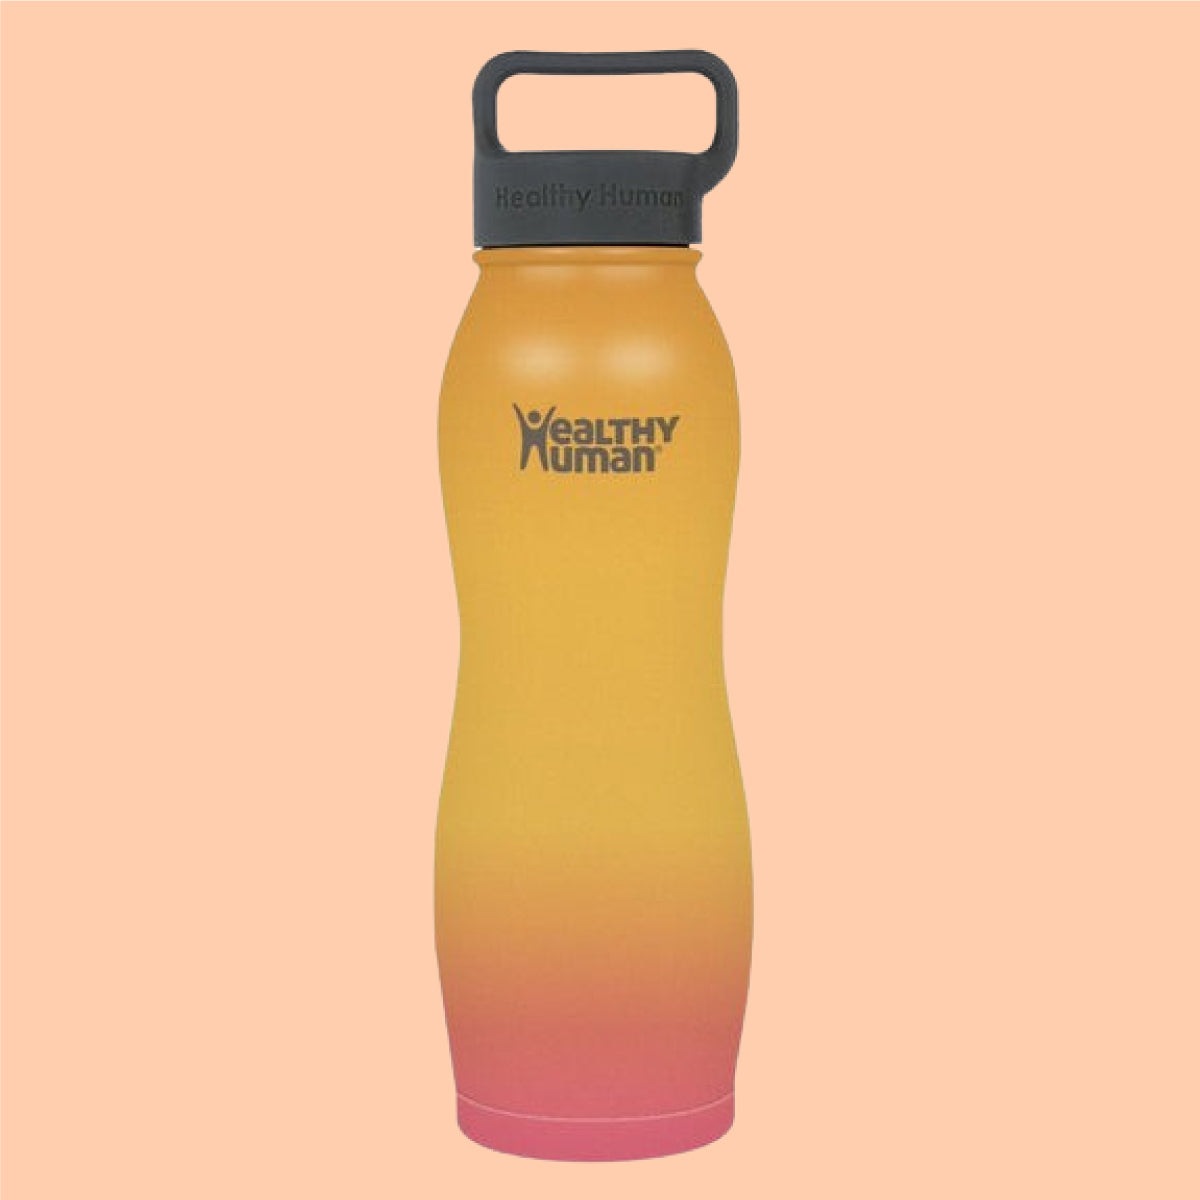 Wholesale water bottle 24 pack to Store, Carry and Keep Water Handy 